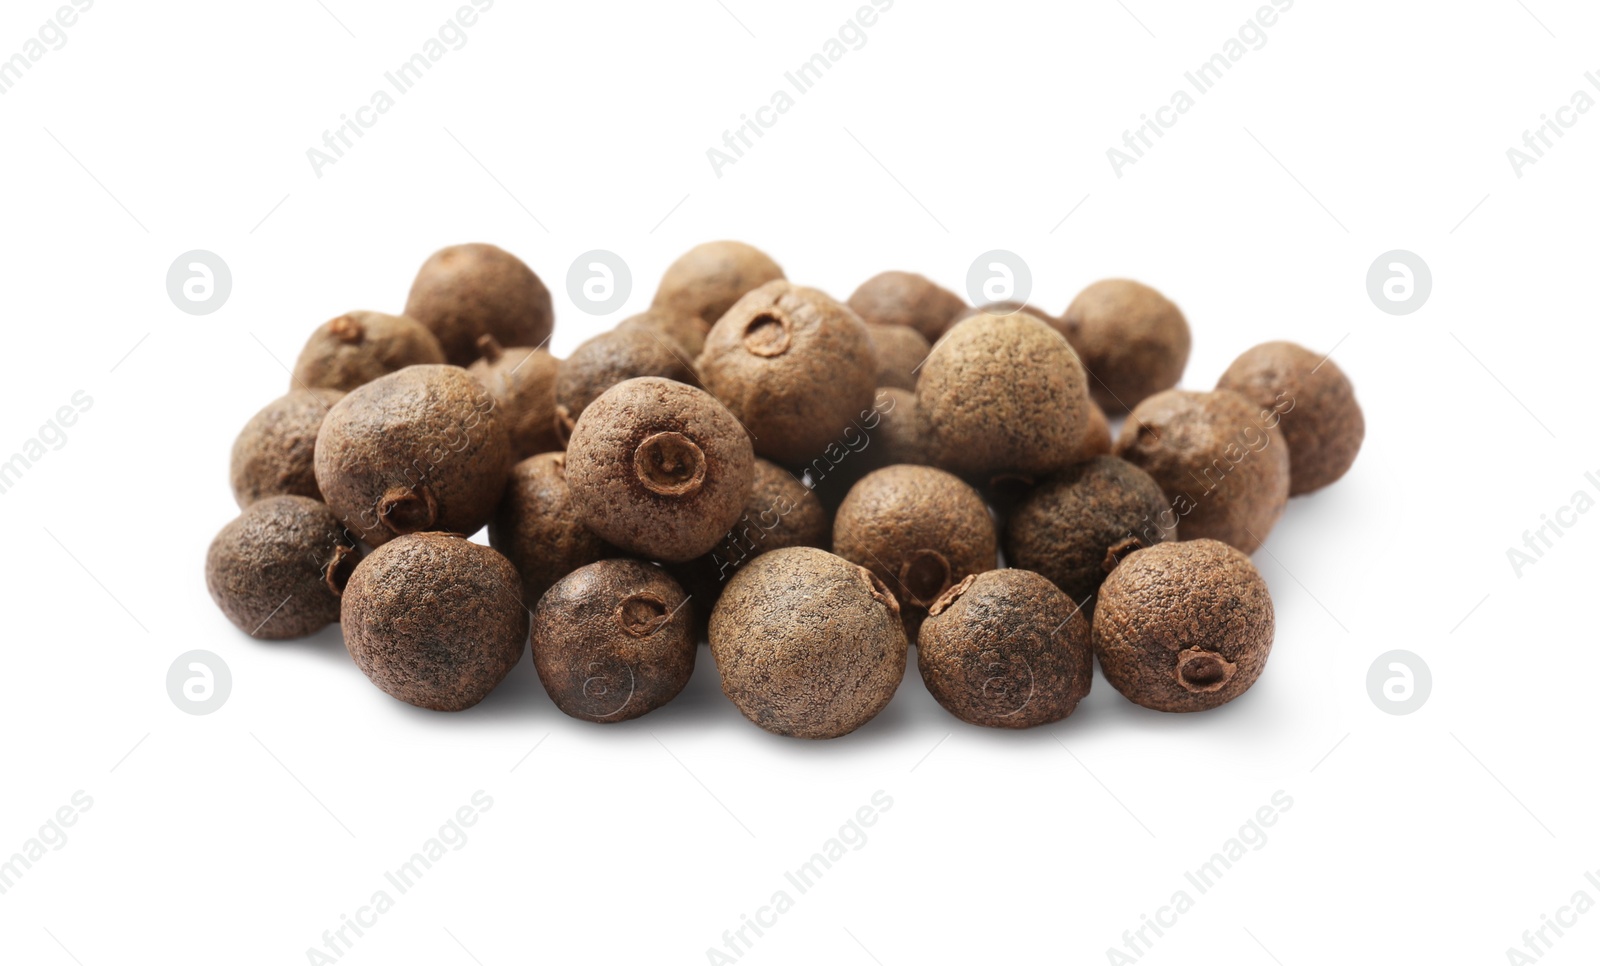 Photo of Dry allspice berries (Jamaica pepper) isolated on white